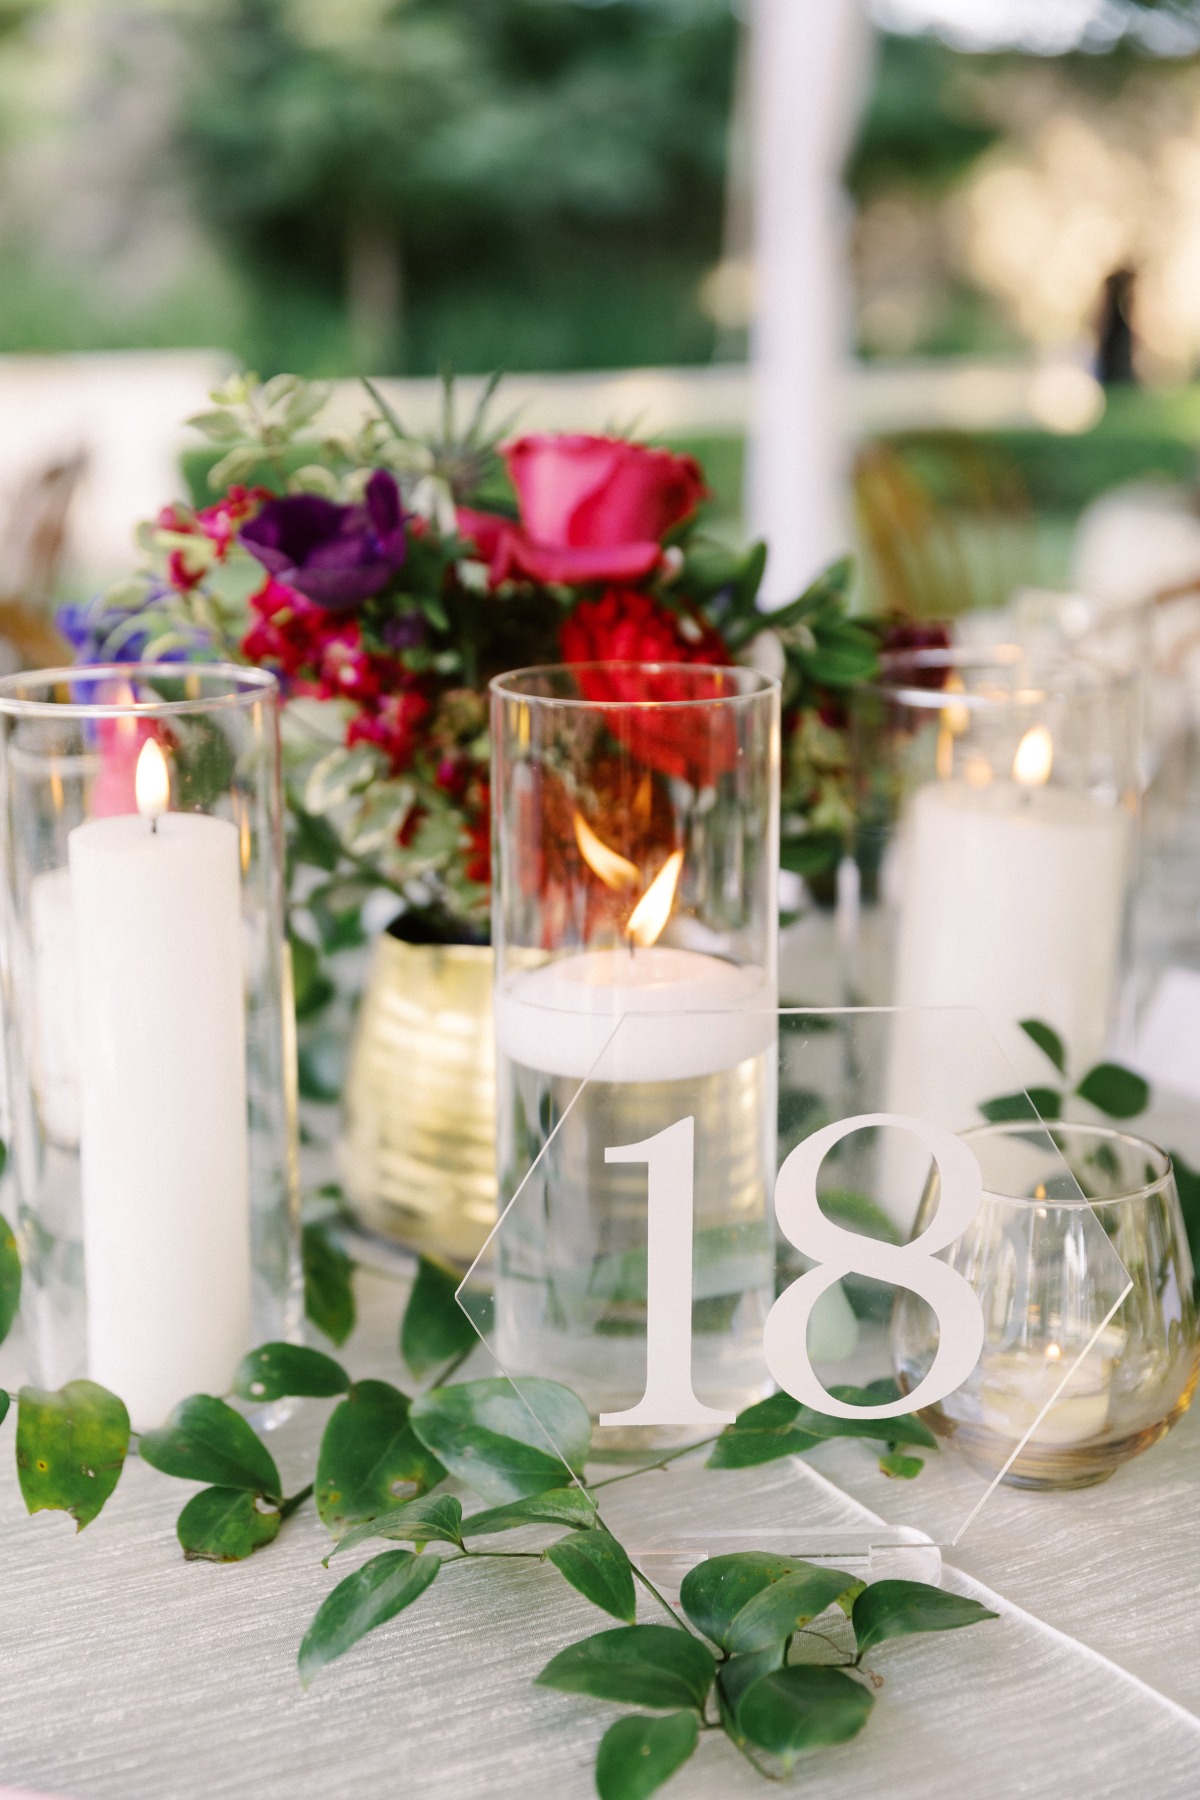 Table number with floral arrangement and floating candles in clear vases